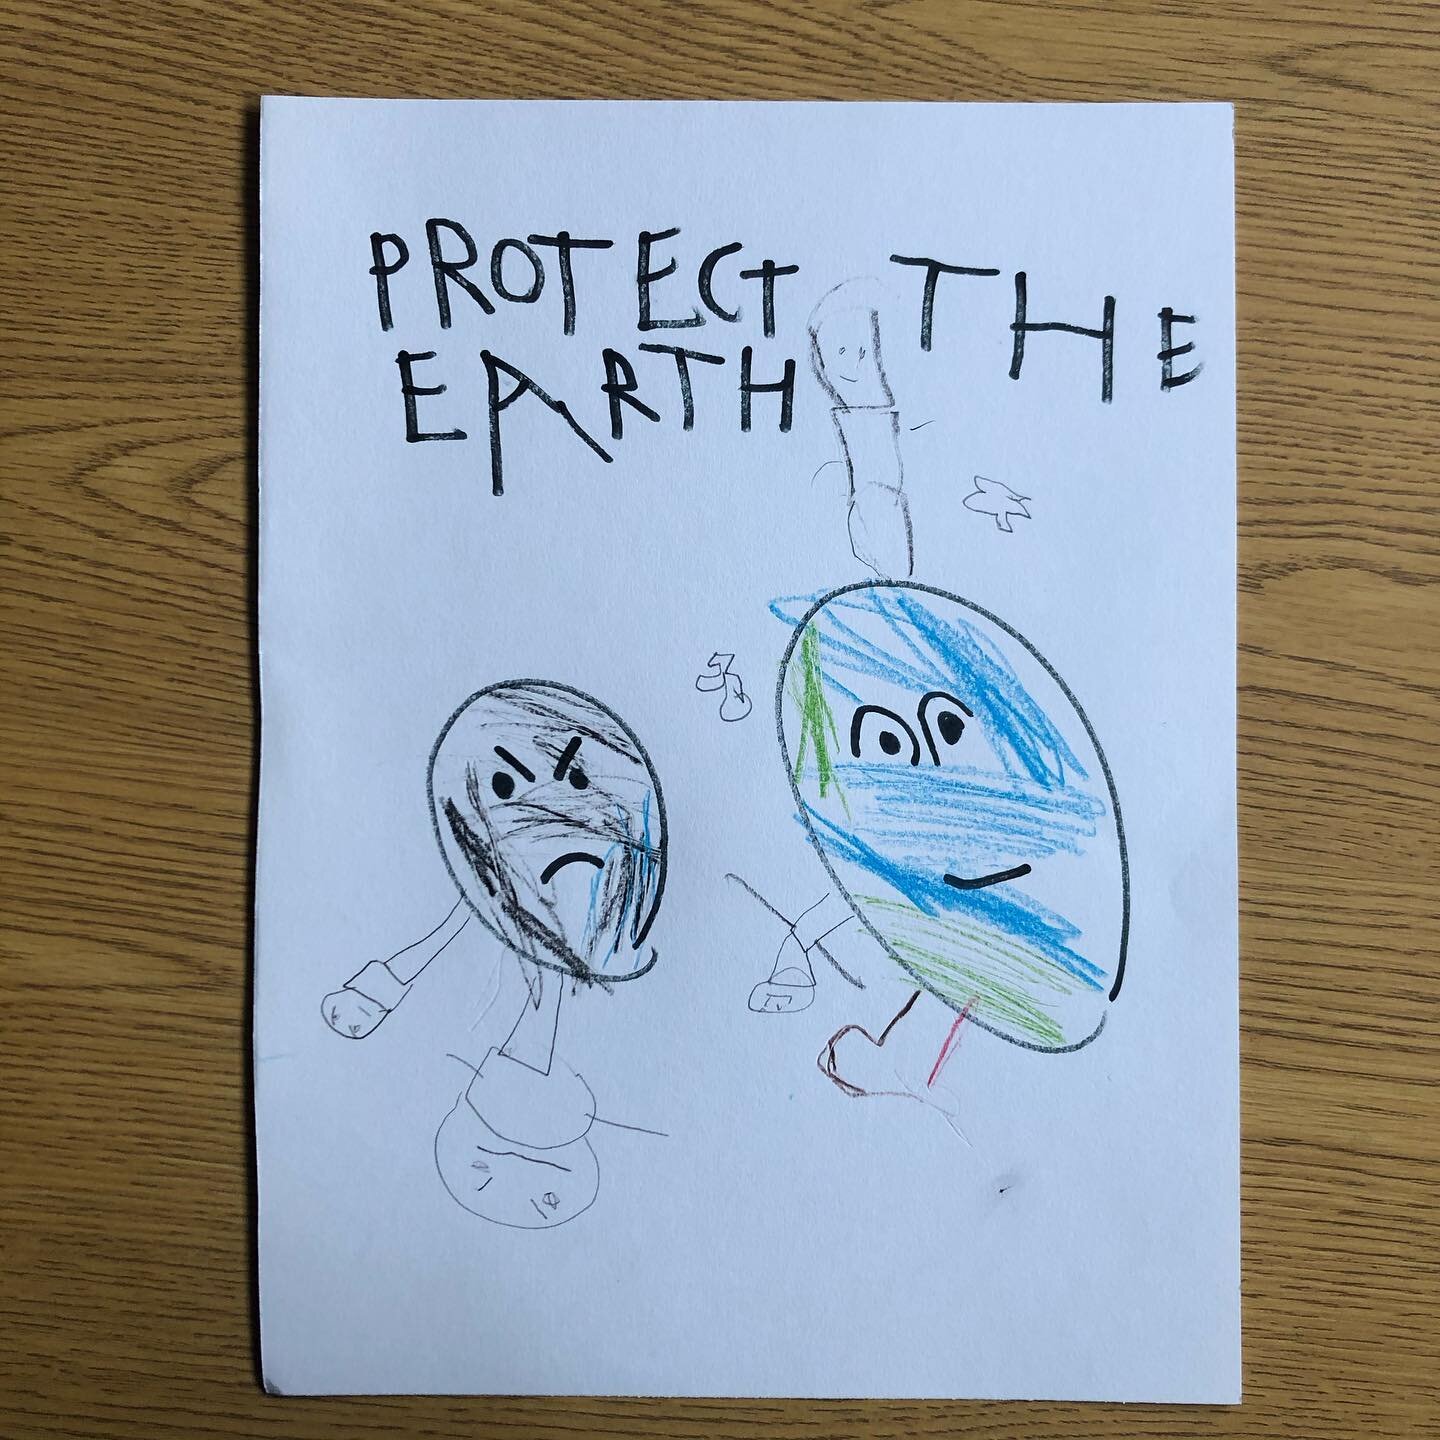 After cleaning up trash at our beloved park, 4K was inspired to make signs to remind all park visitors to help protect our earth! 🌎